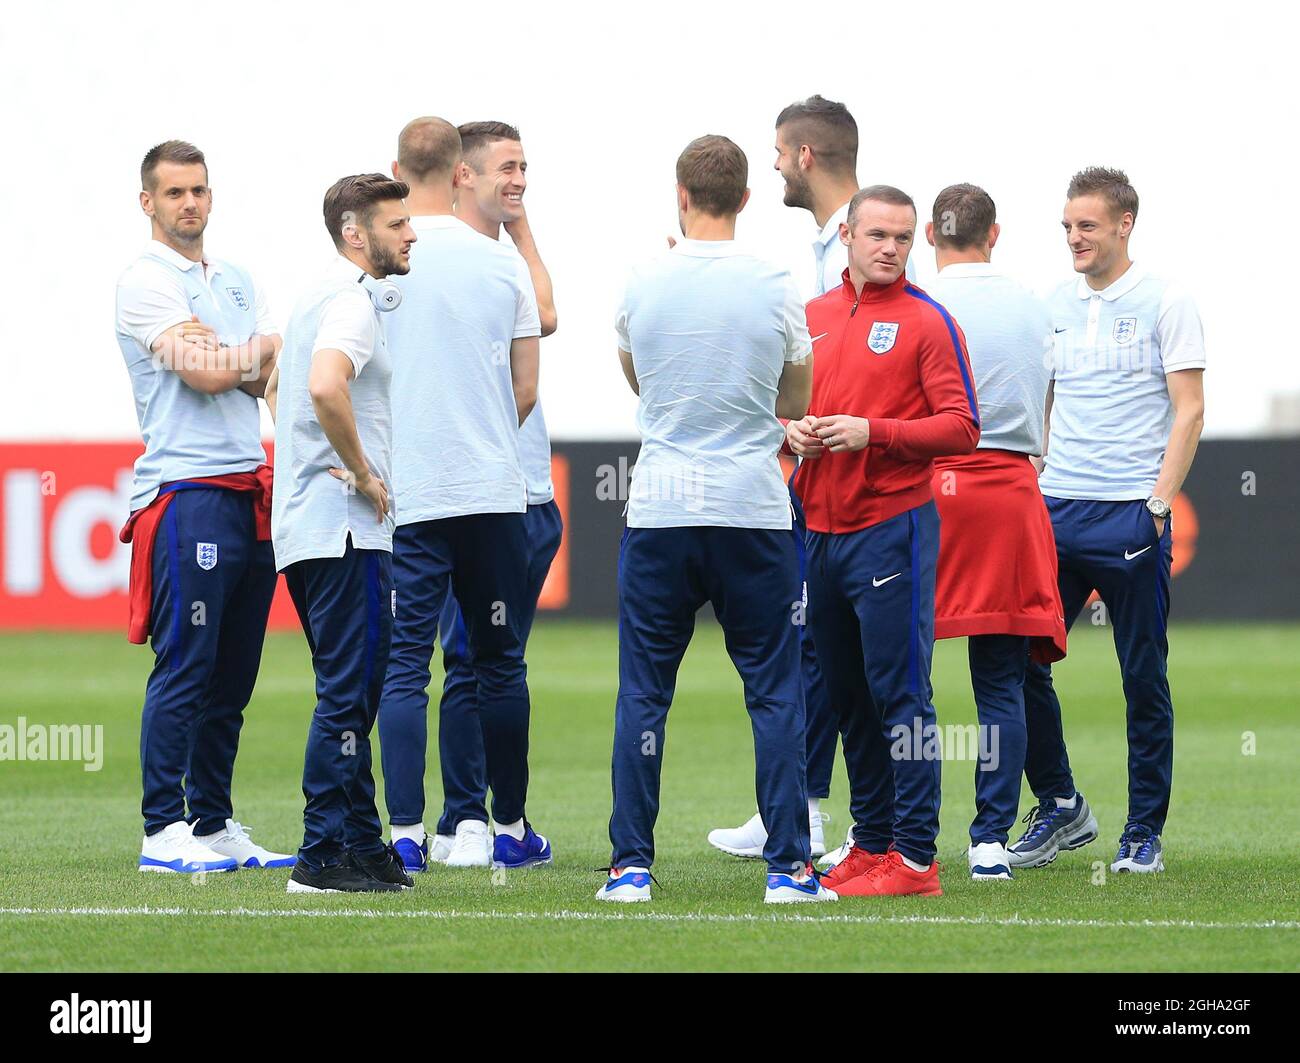 Englandâ€™s Wayne Rooney during the walkaround the UEFA European Championship 2016 match at the Stade Velodrome, Marseille. Picture date June 10th, 2016 Pic David Klein/Sportimage via PA Images Stock Photo